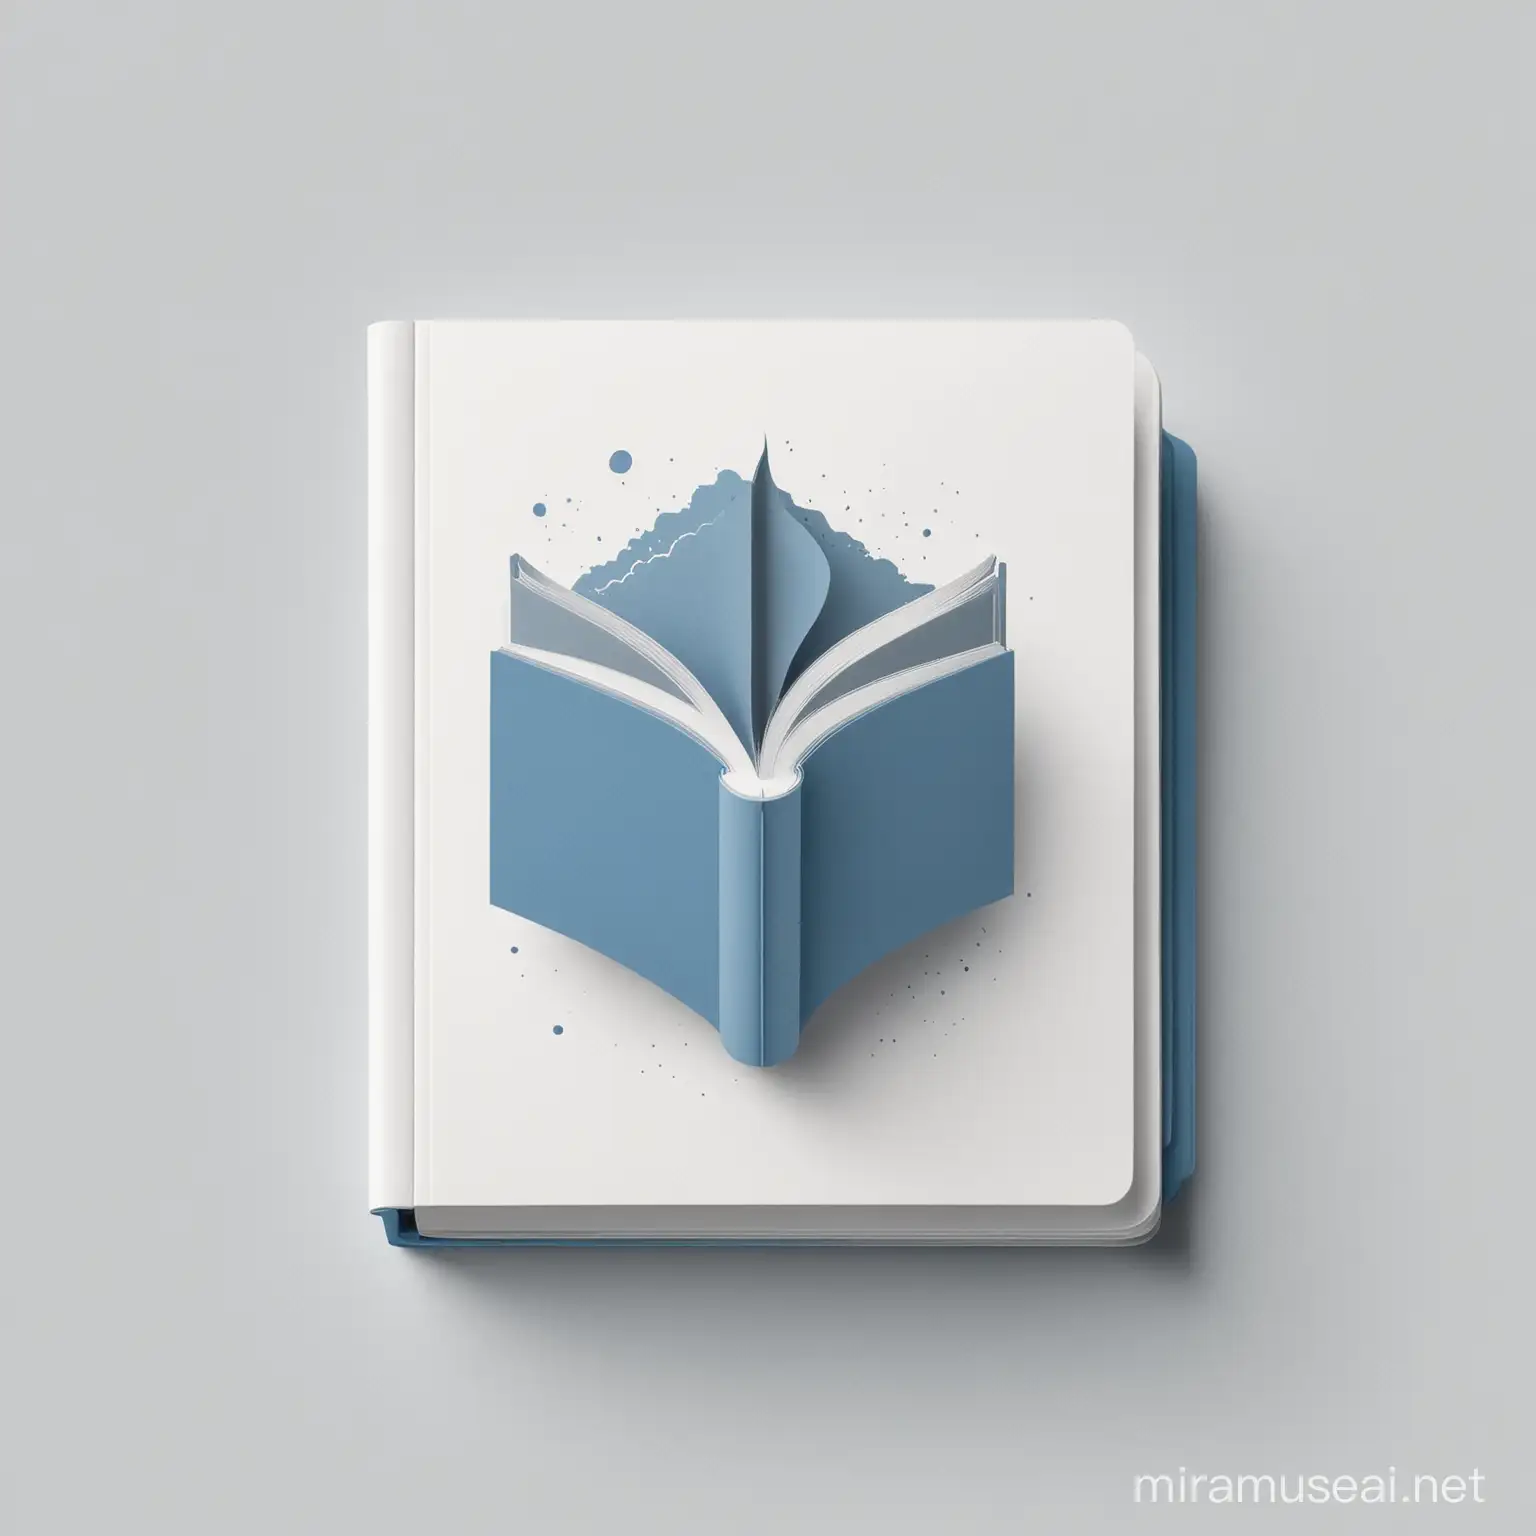 minimalistic logo for book writers organisation 'JERONIMO' blue white and grey colour icon, clear white background, no lines